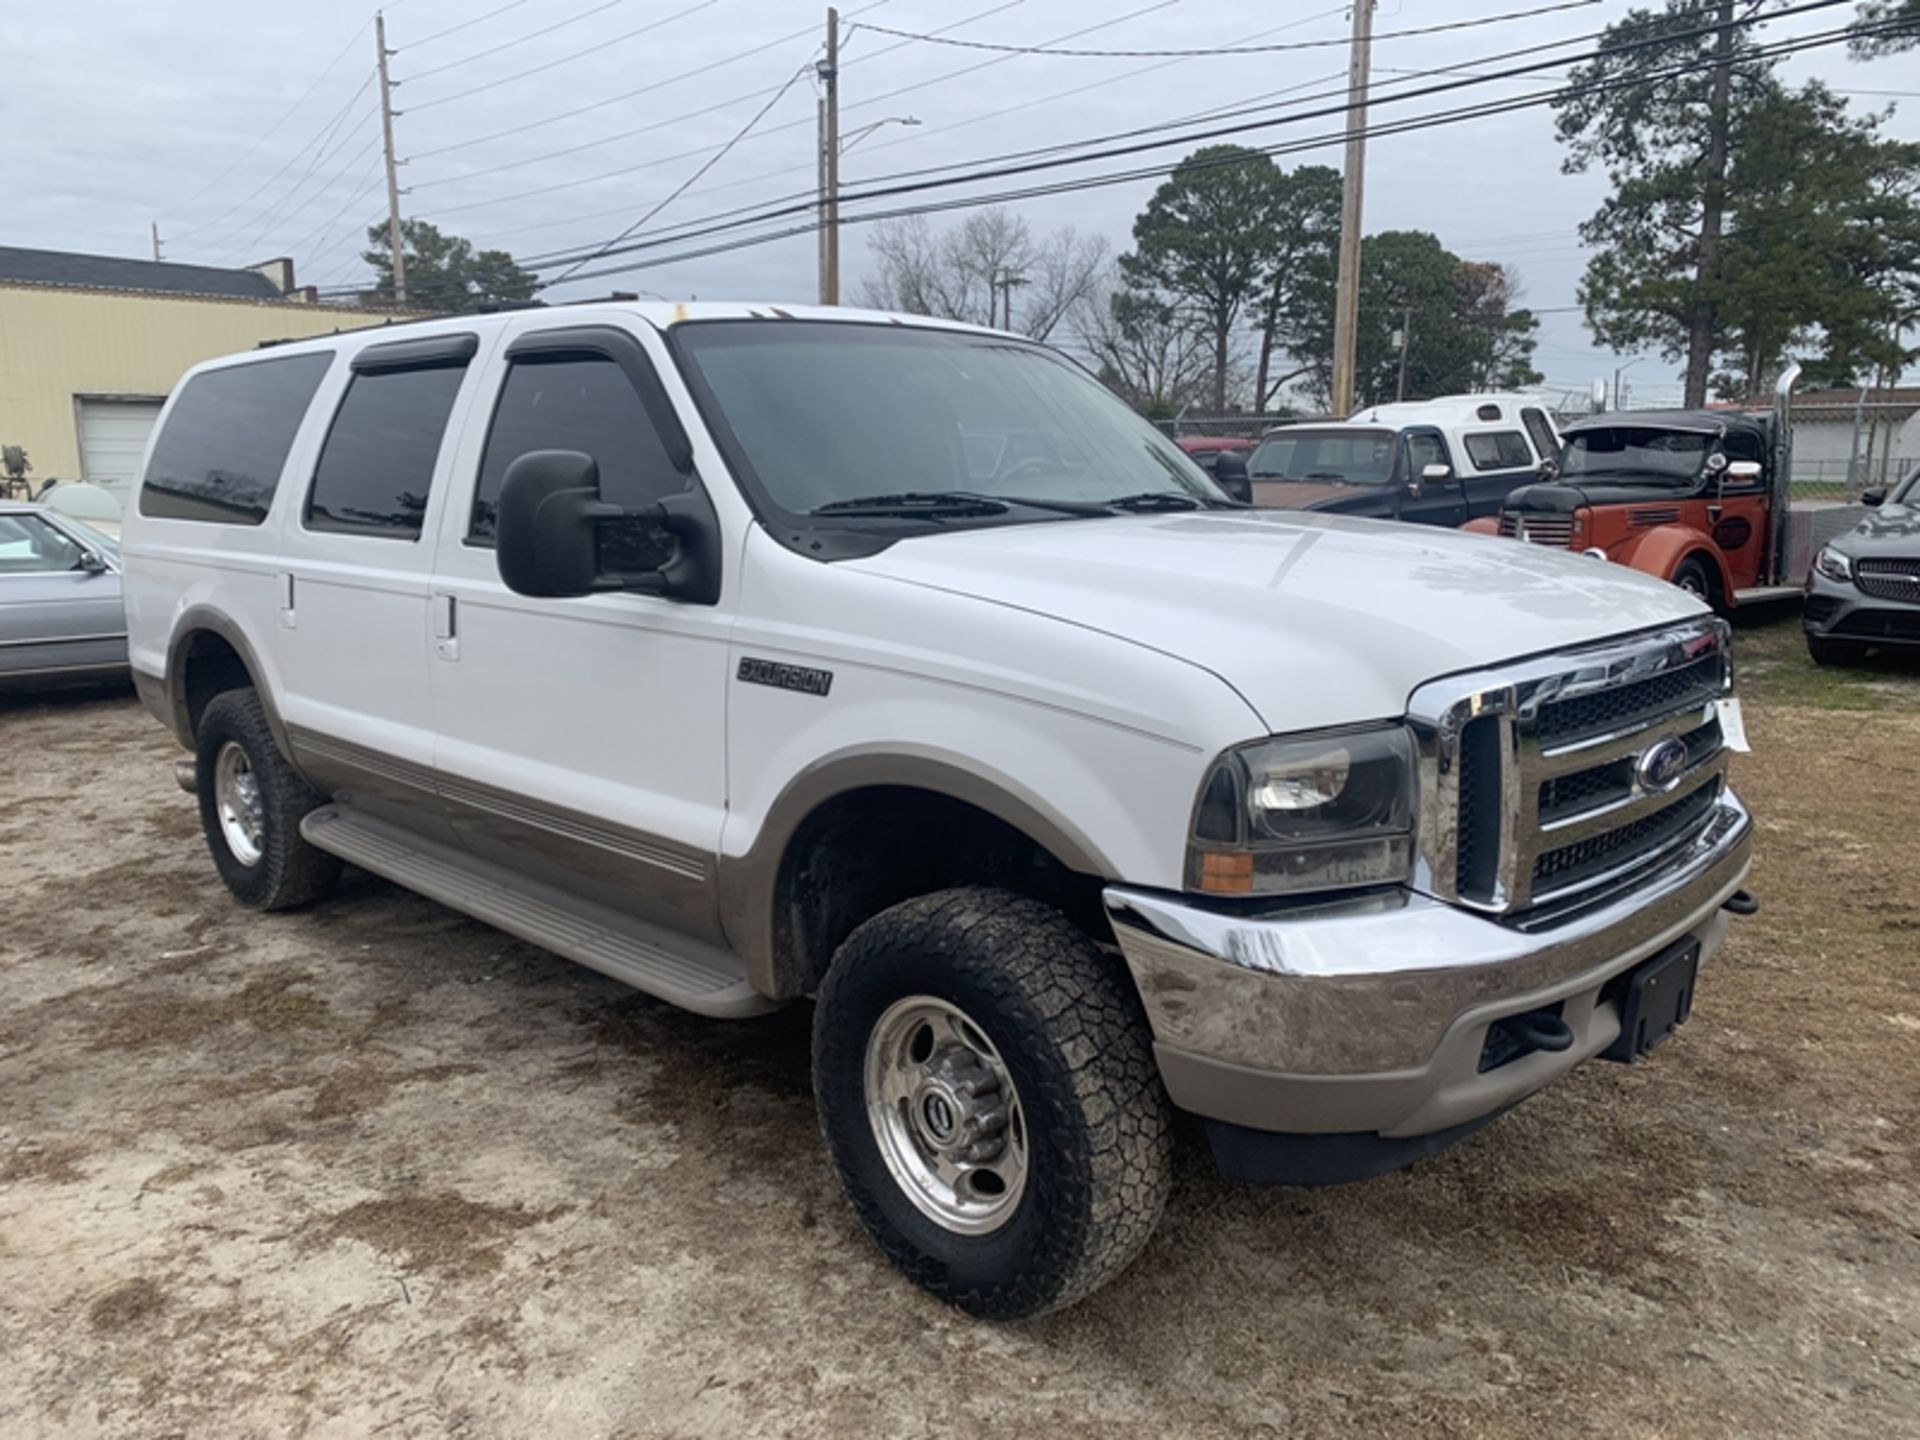 2001 FORD Excursion Limited 4wd, 7.3L diesel - 363,882 miles showing - 1FMSU43F81EA20324 - Image 2 of 14